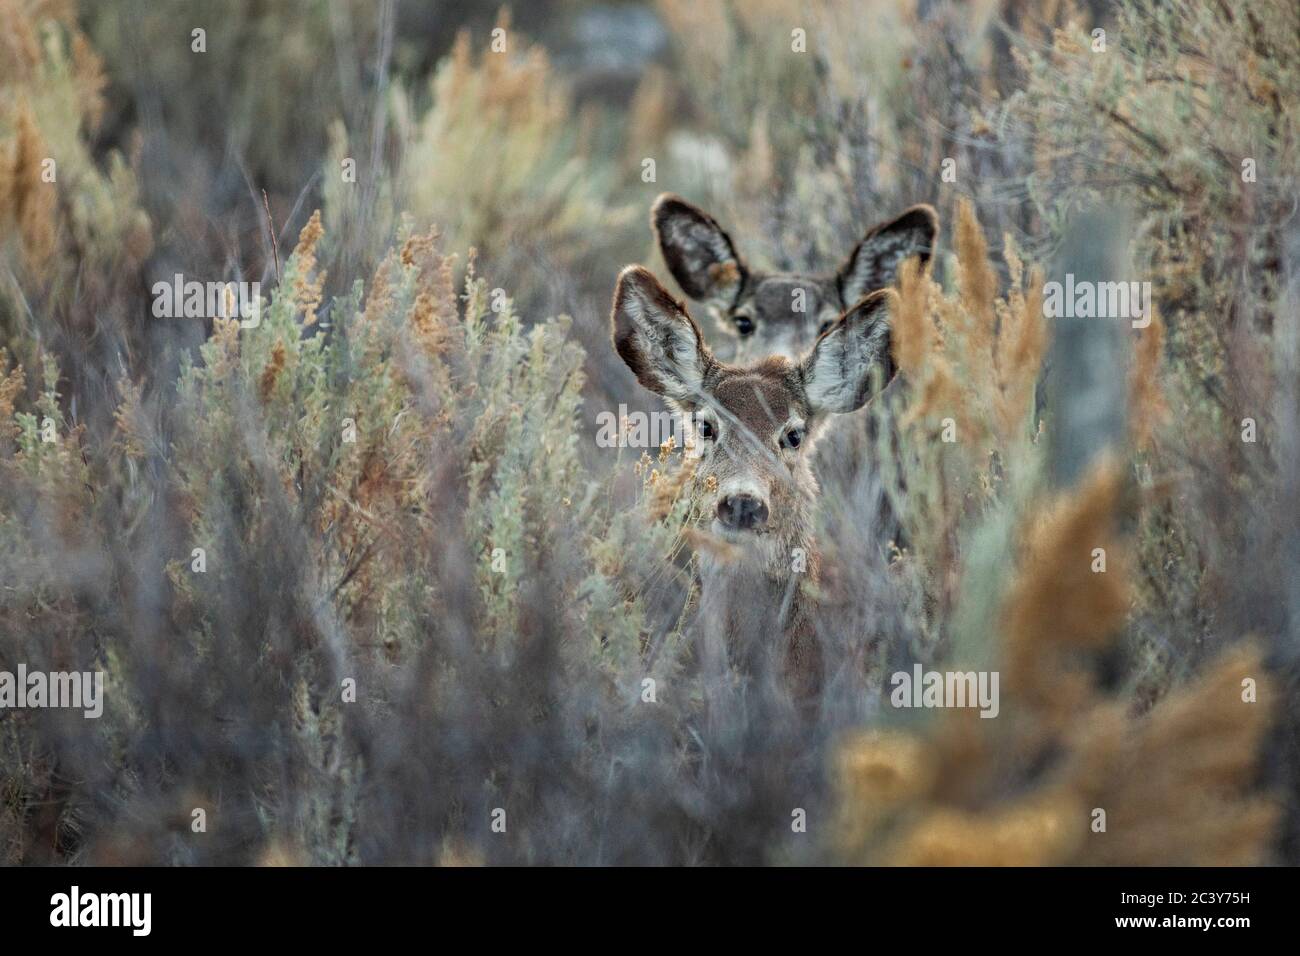 Two deer looking at camera hiding in tall grass Stock Photo